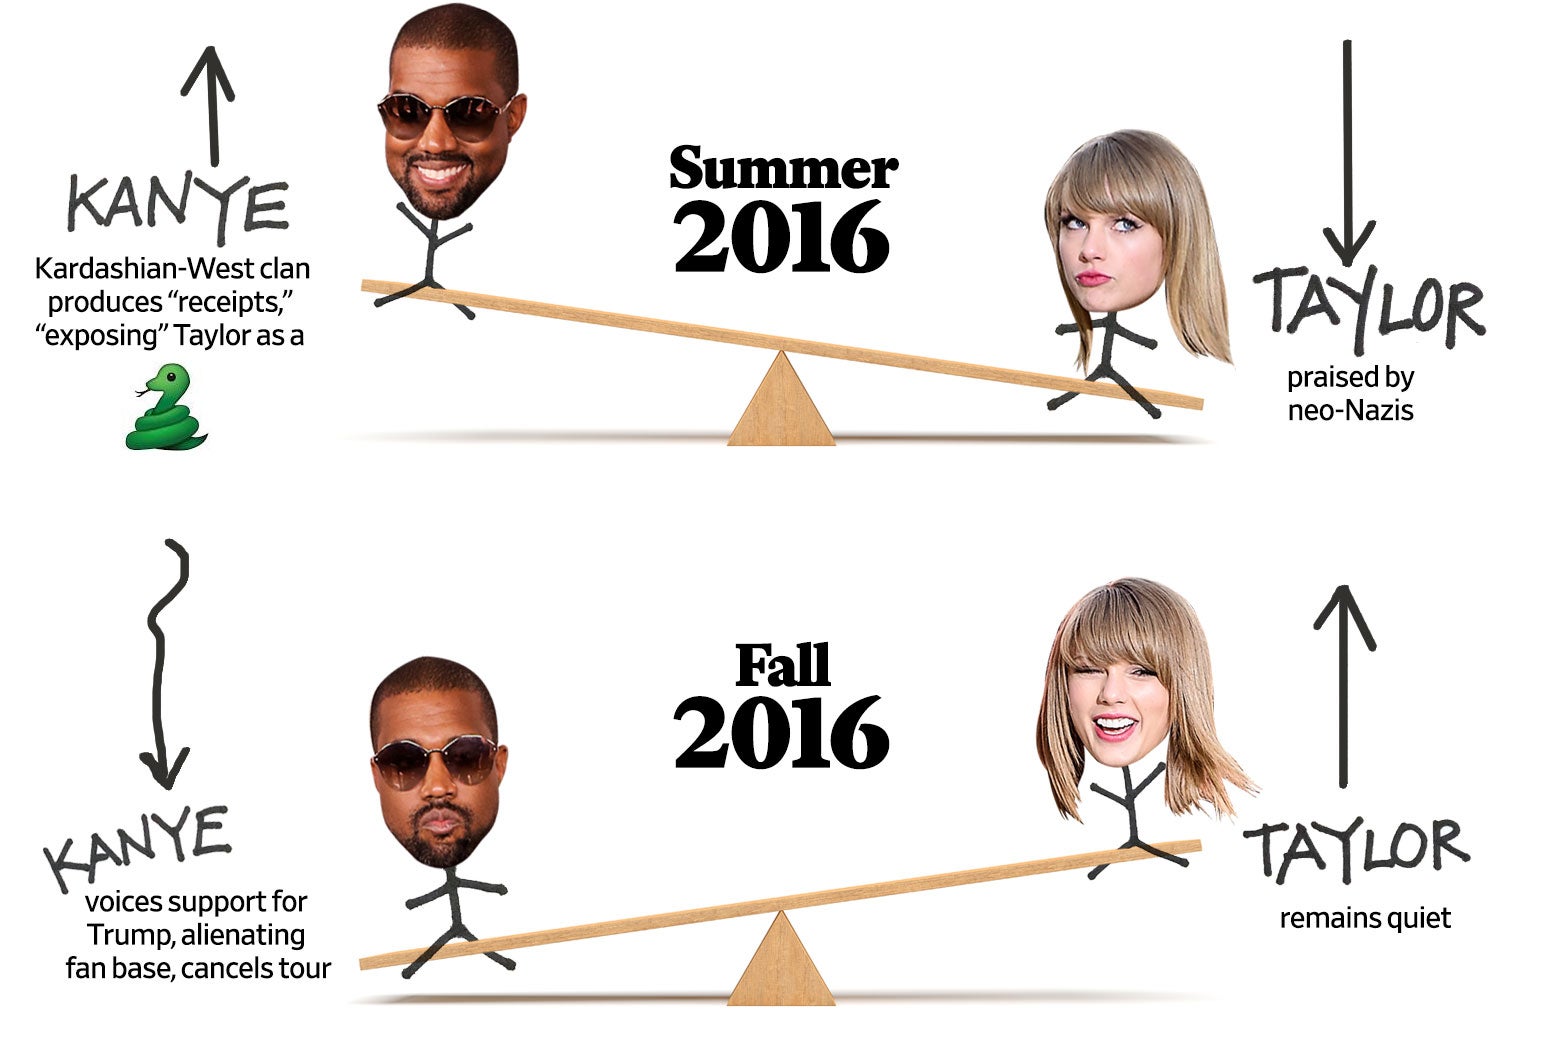 A Timeline of Kanye West and Taylor Swift’s Seesawing Fortunes